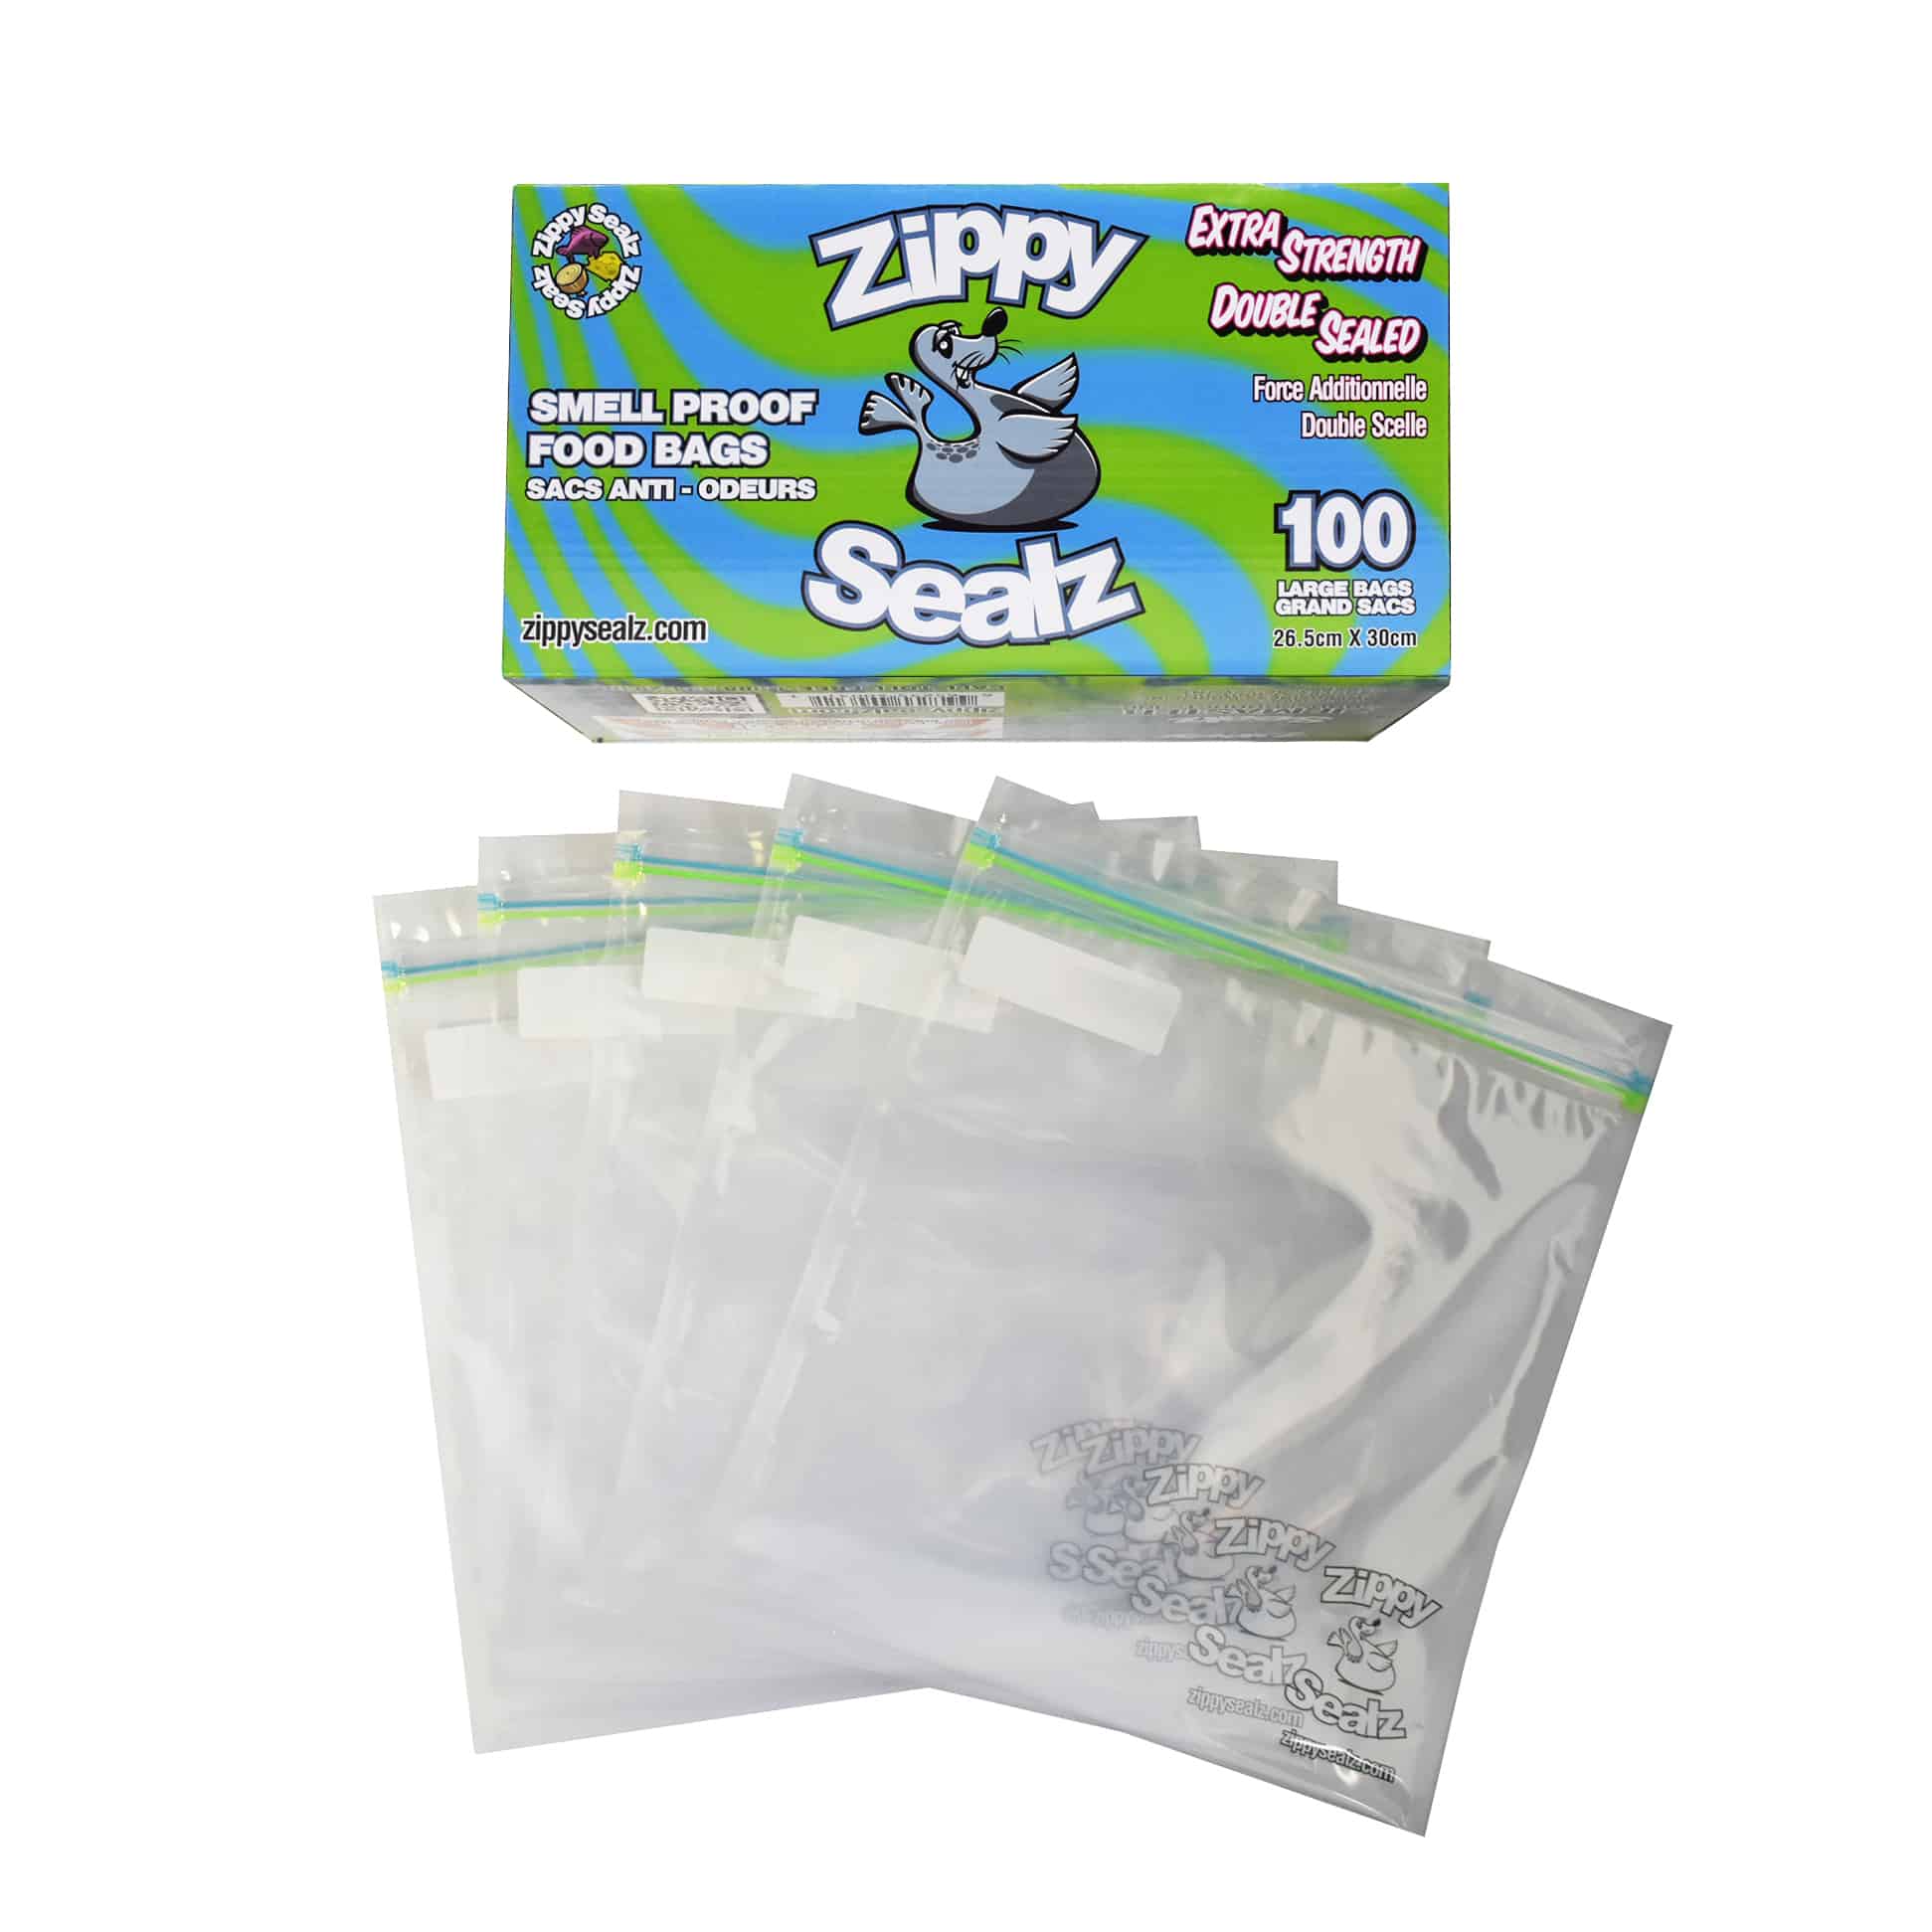 Zippy Sealz smell proof food bags